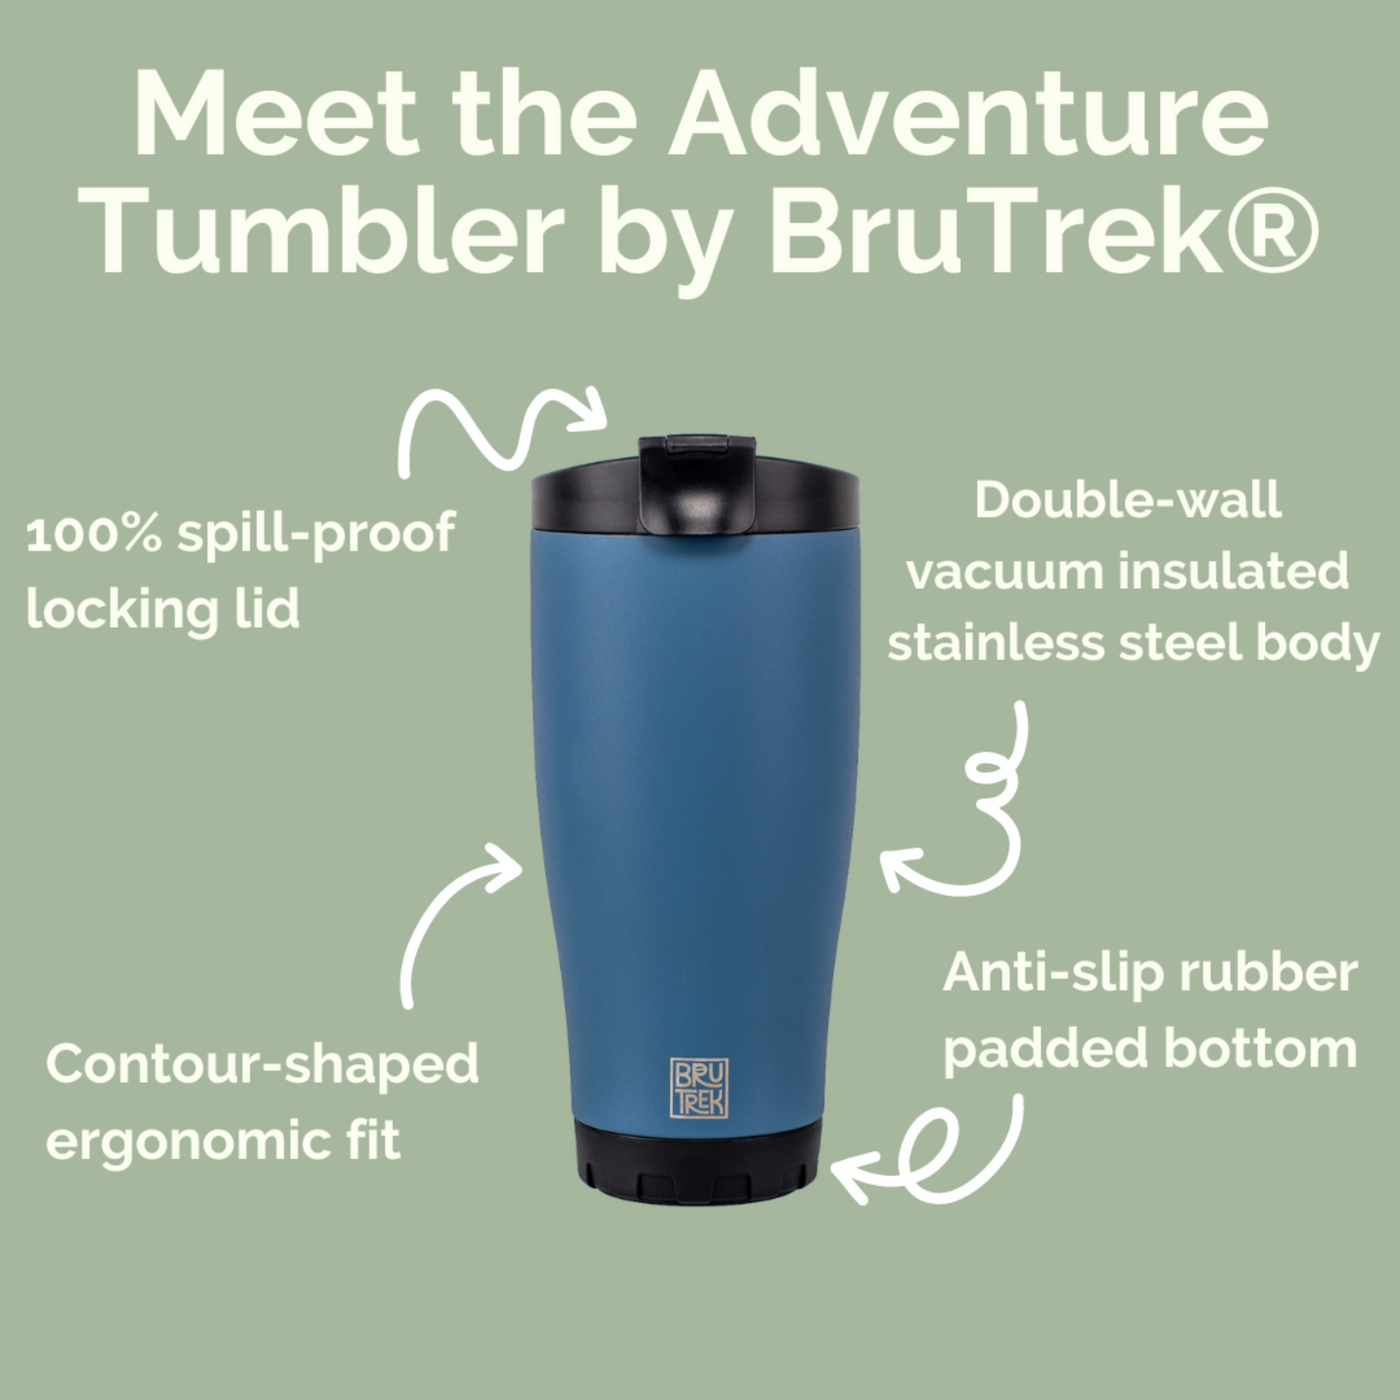 infographic showing advantages of Adventure Tumbler, including 100% spill-proof locking lid; contour-shaped ergonomic fit; double-wall vacuum insulated stainless steel body; and anti-slip rubber padded bottom